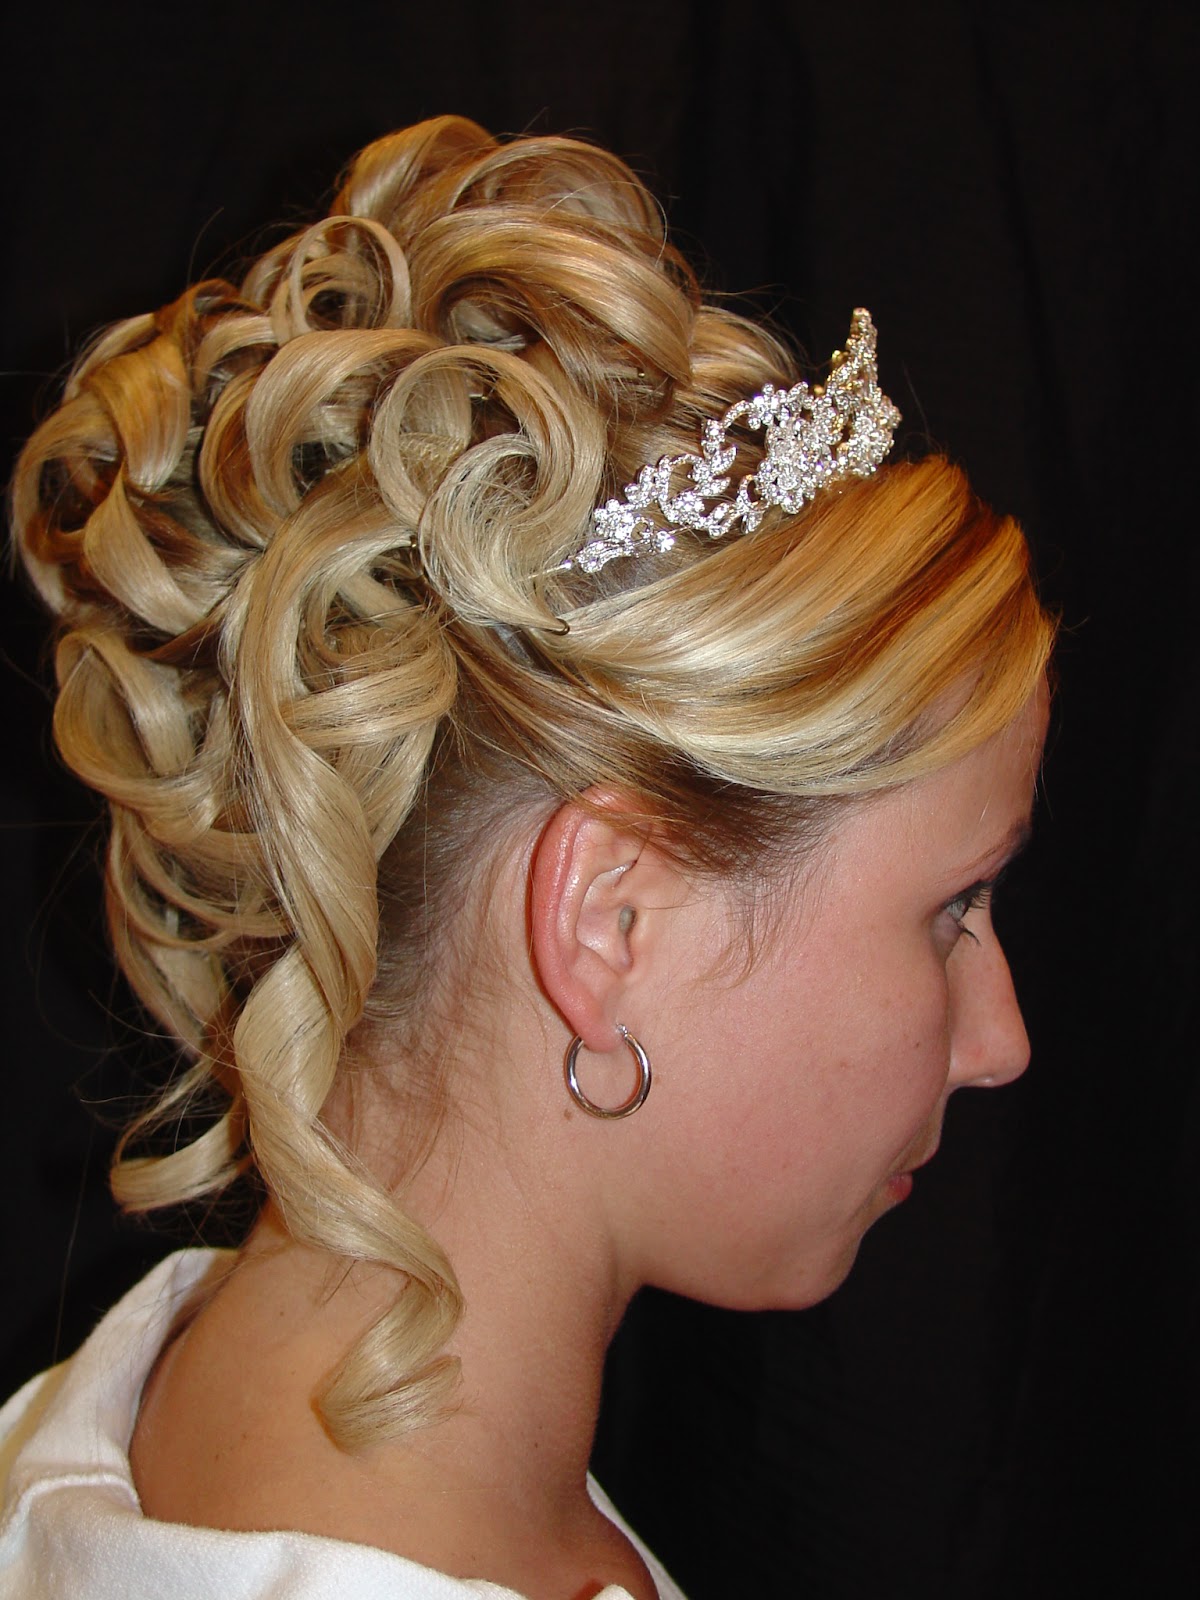 Hairstyles for Women: Cute Prom Hairstyles For Women 2012